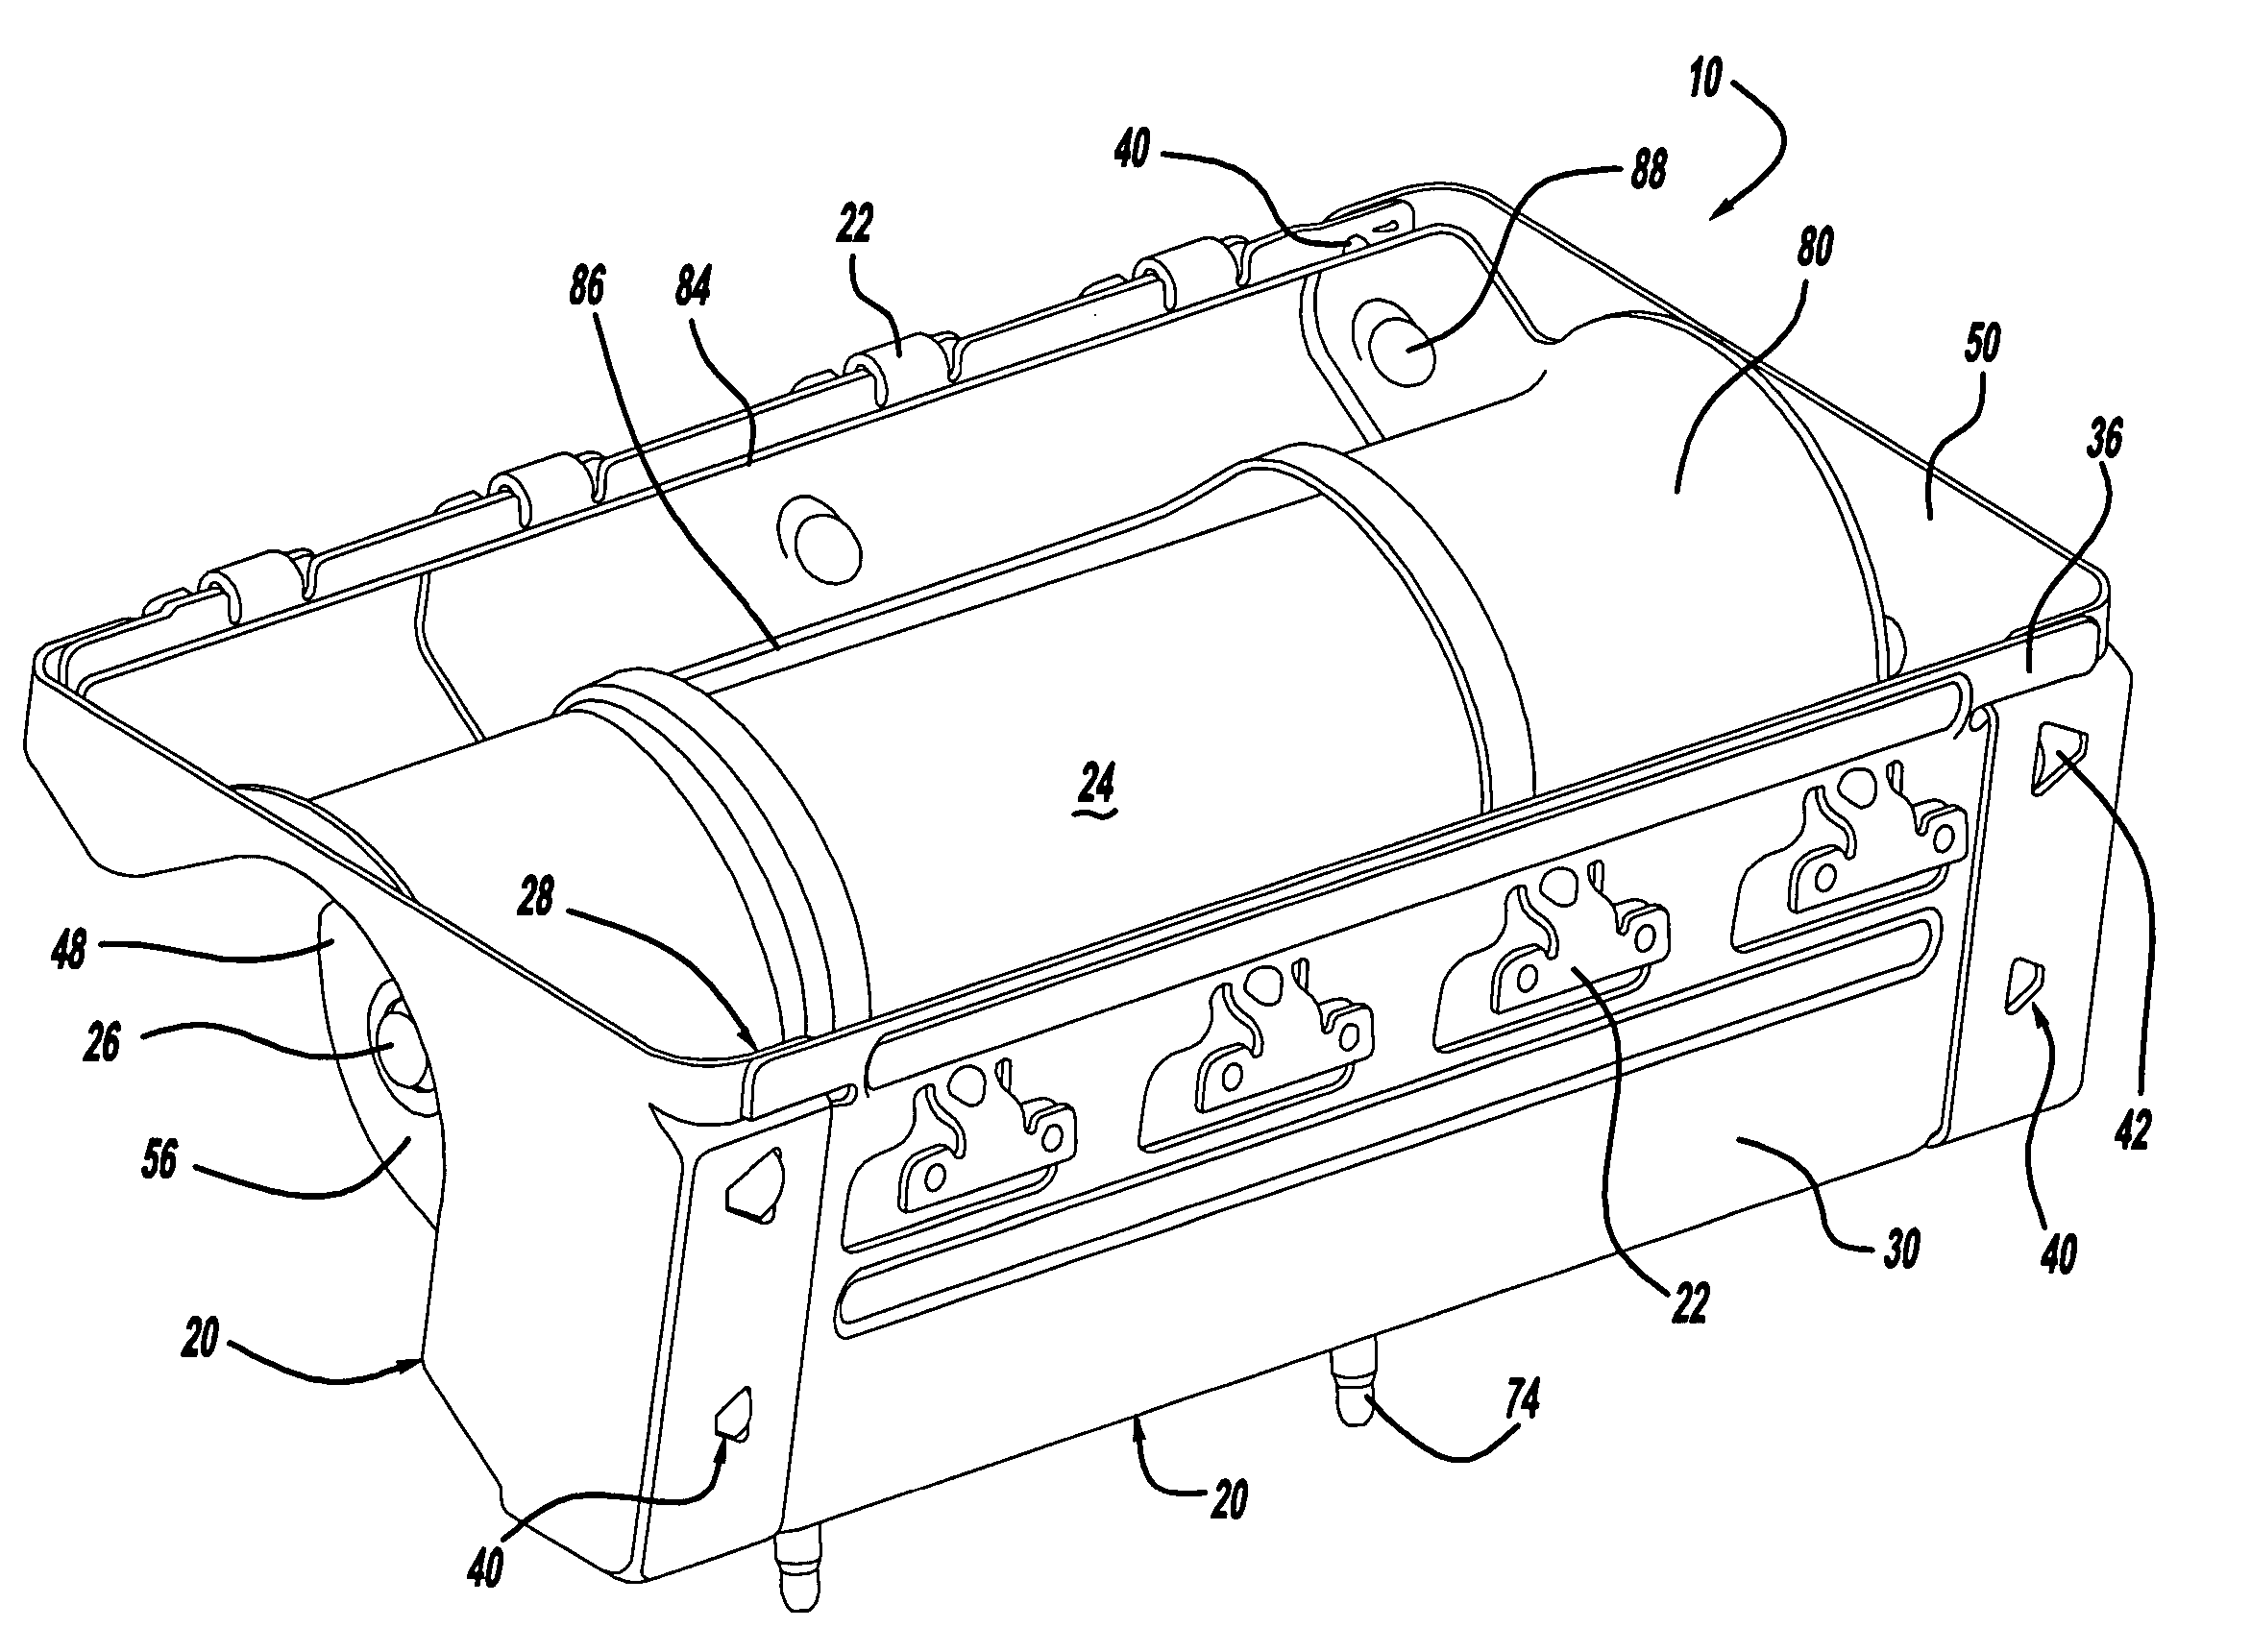 Airbag module canister